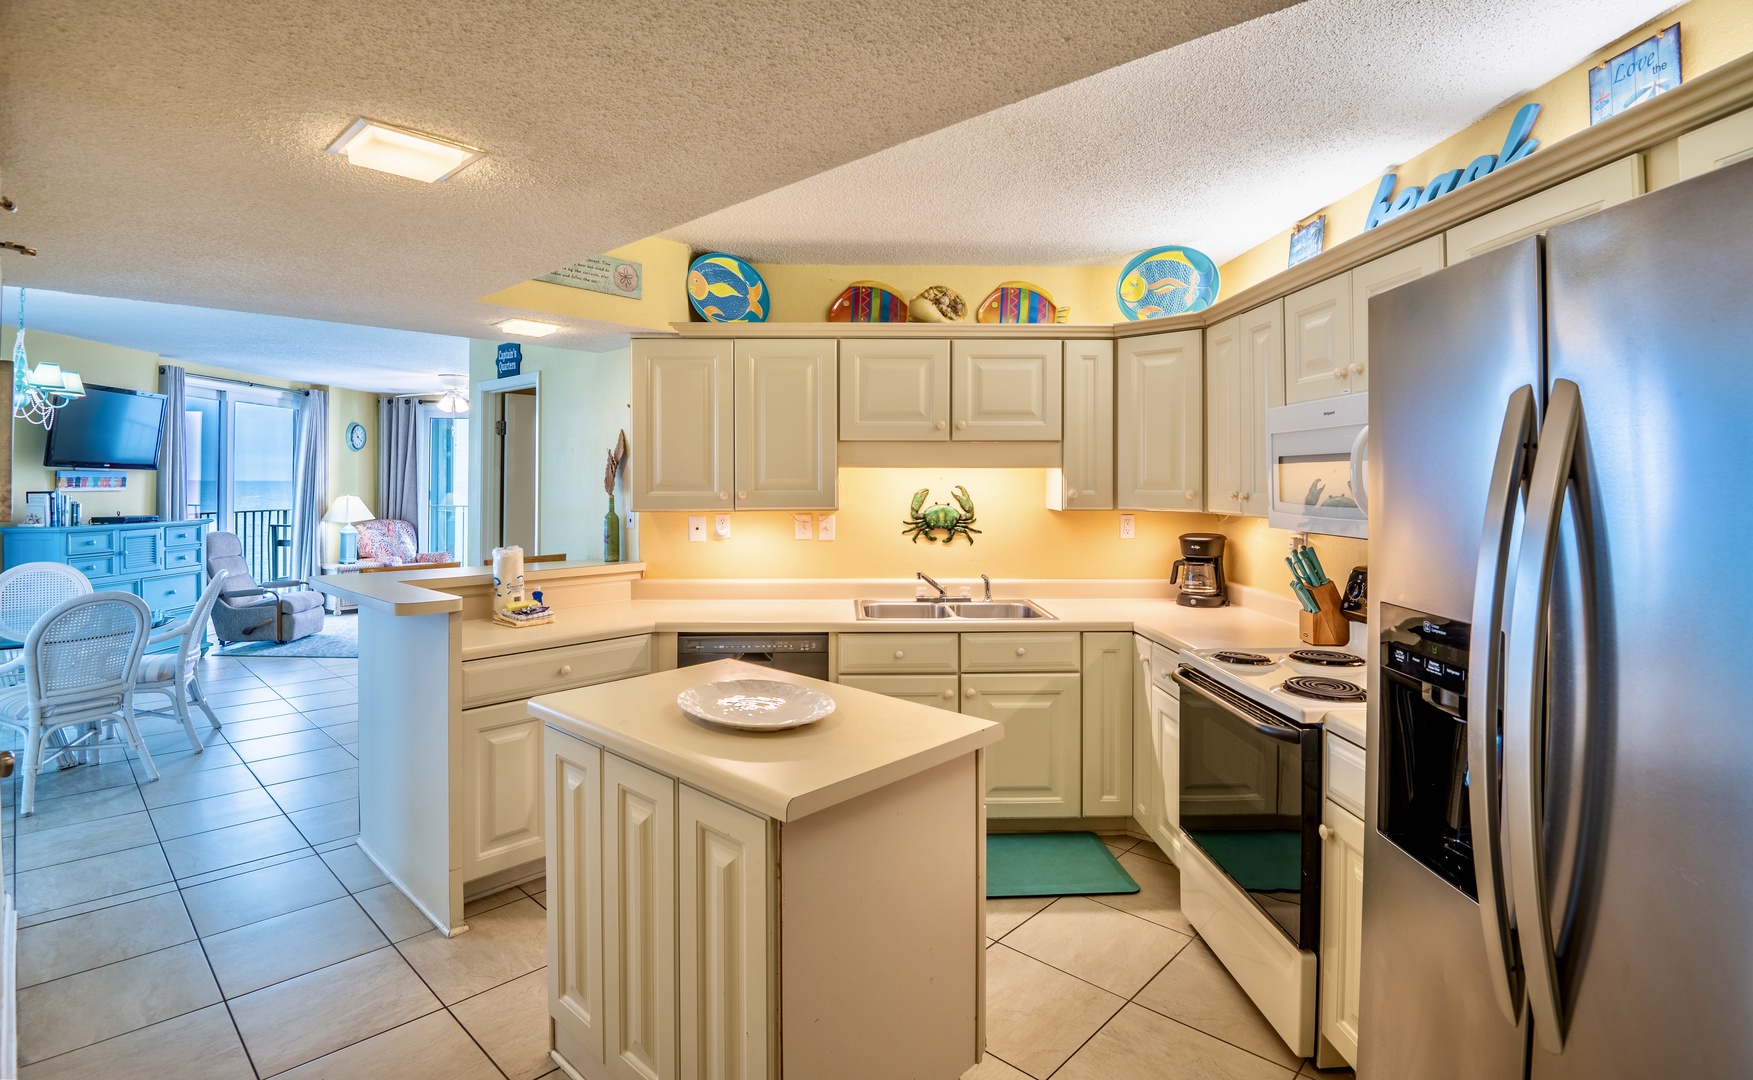 Delight in the convenience of the fully equipped kitchen